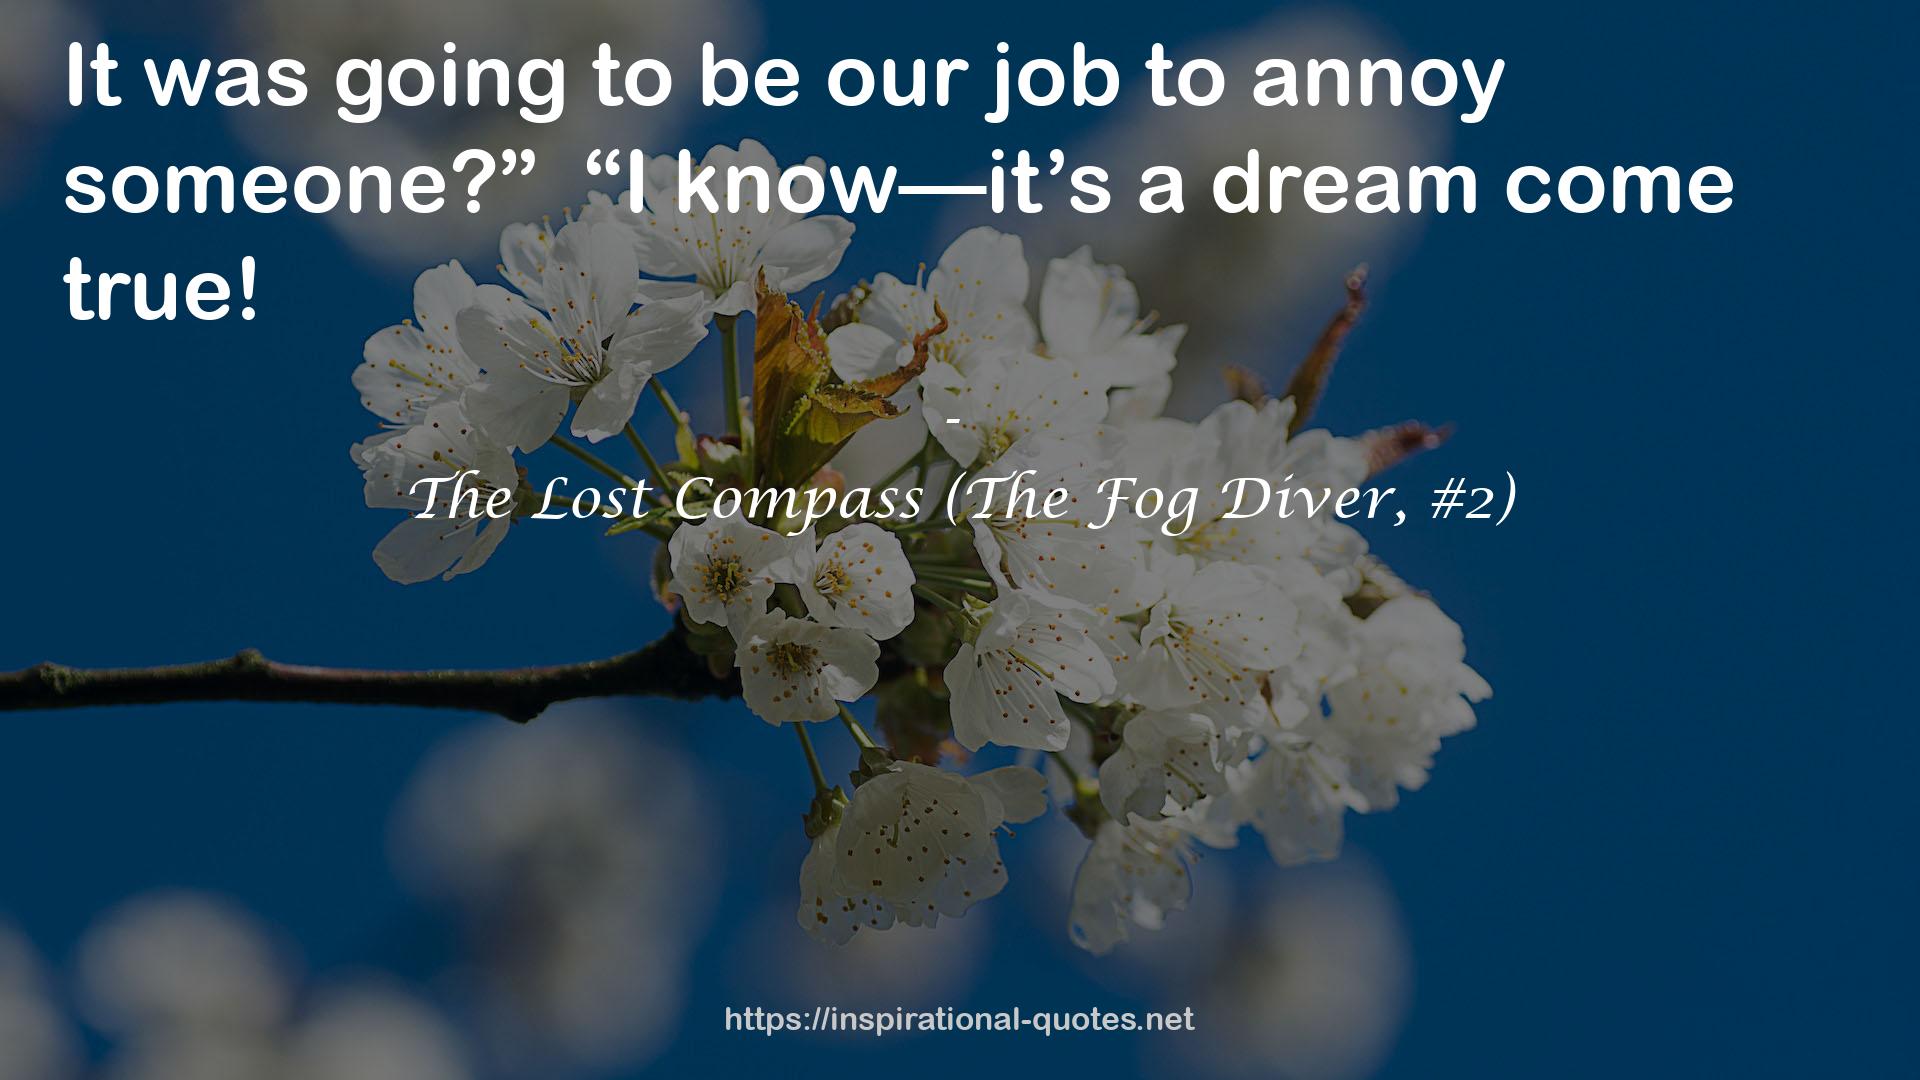 The Lost Compass (The Fog Diver, #2) QUOTES